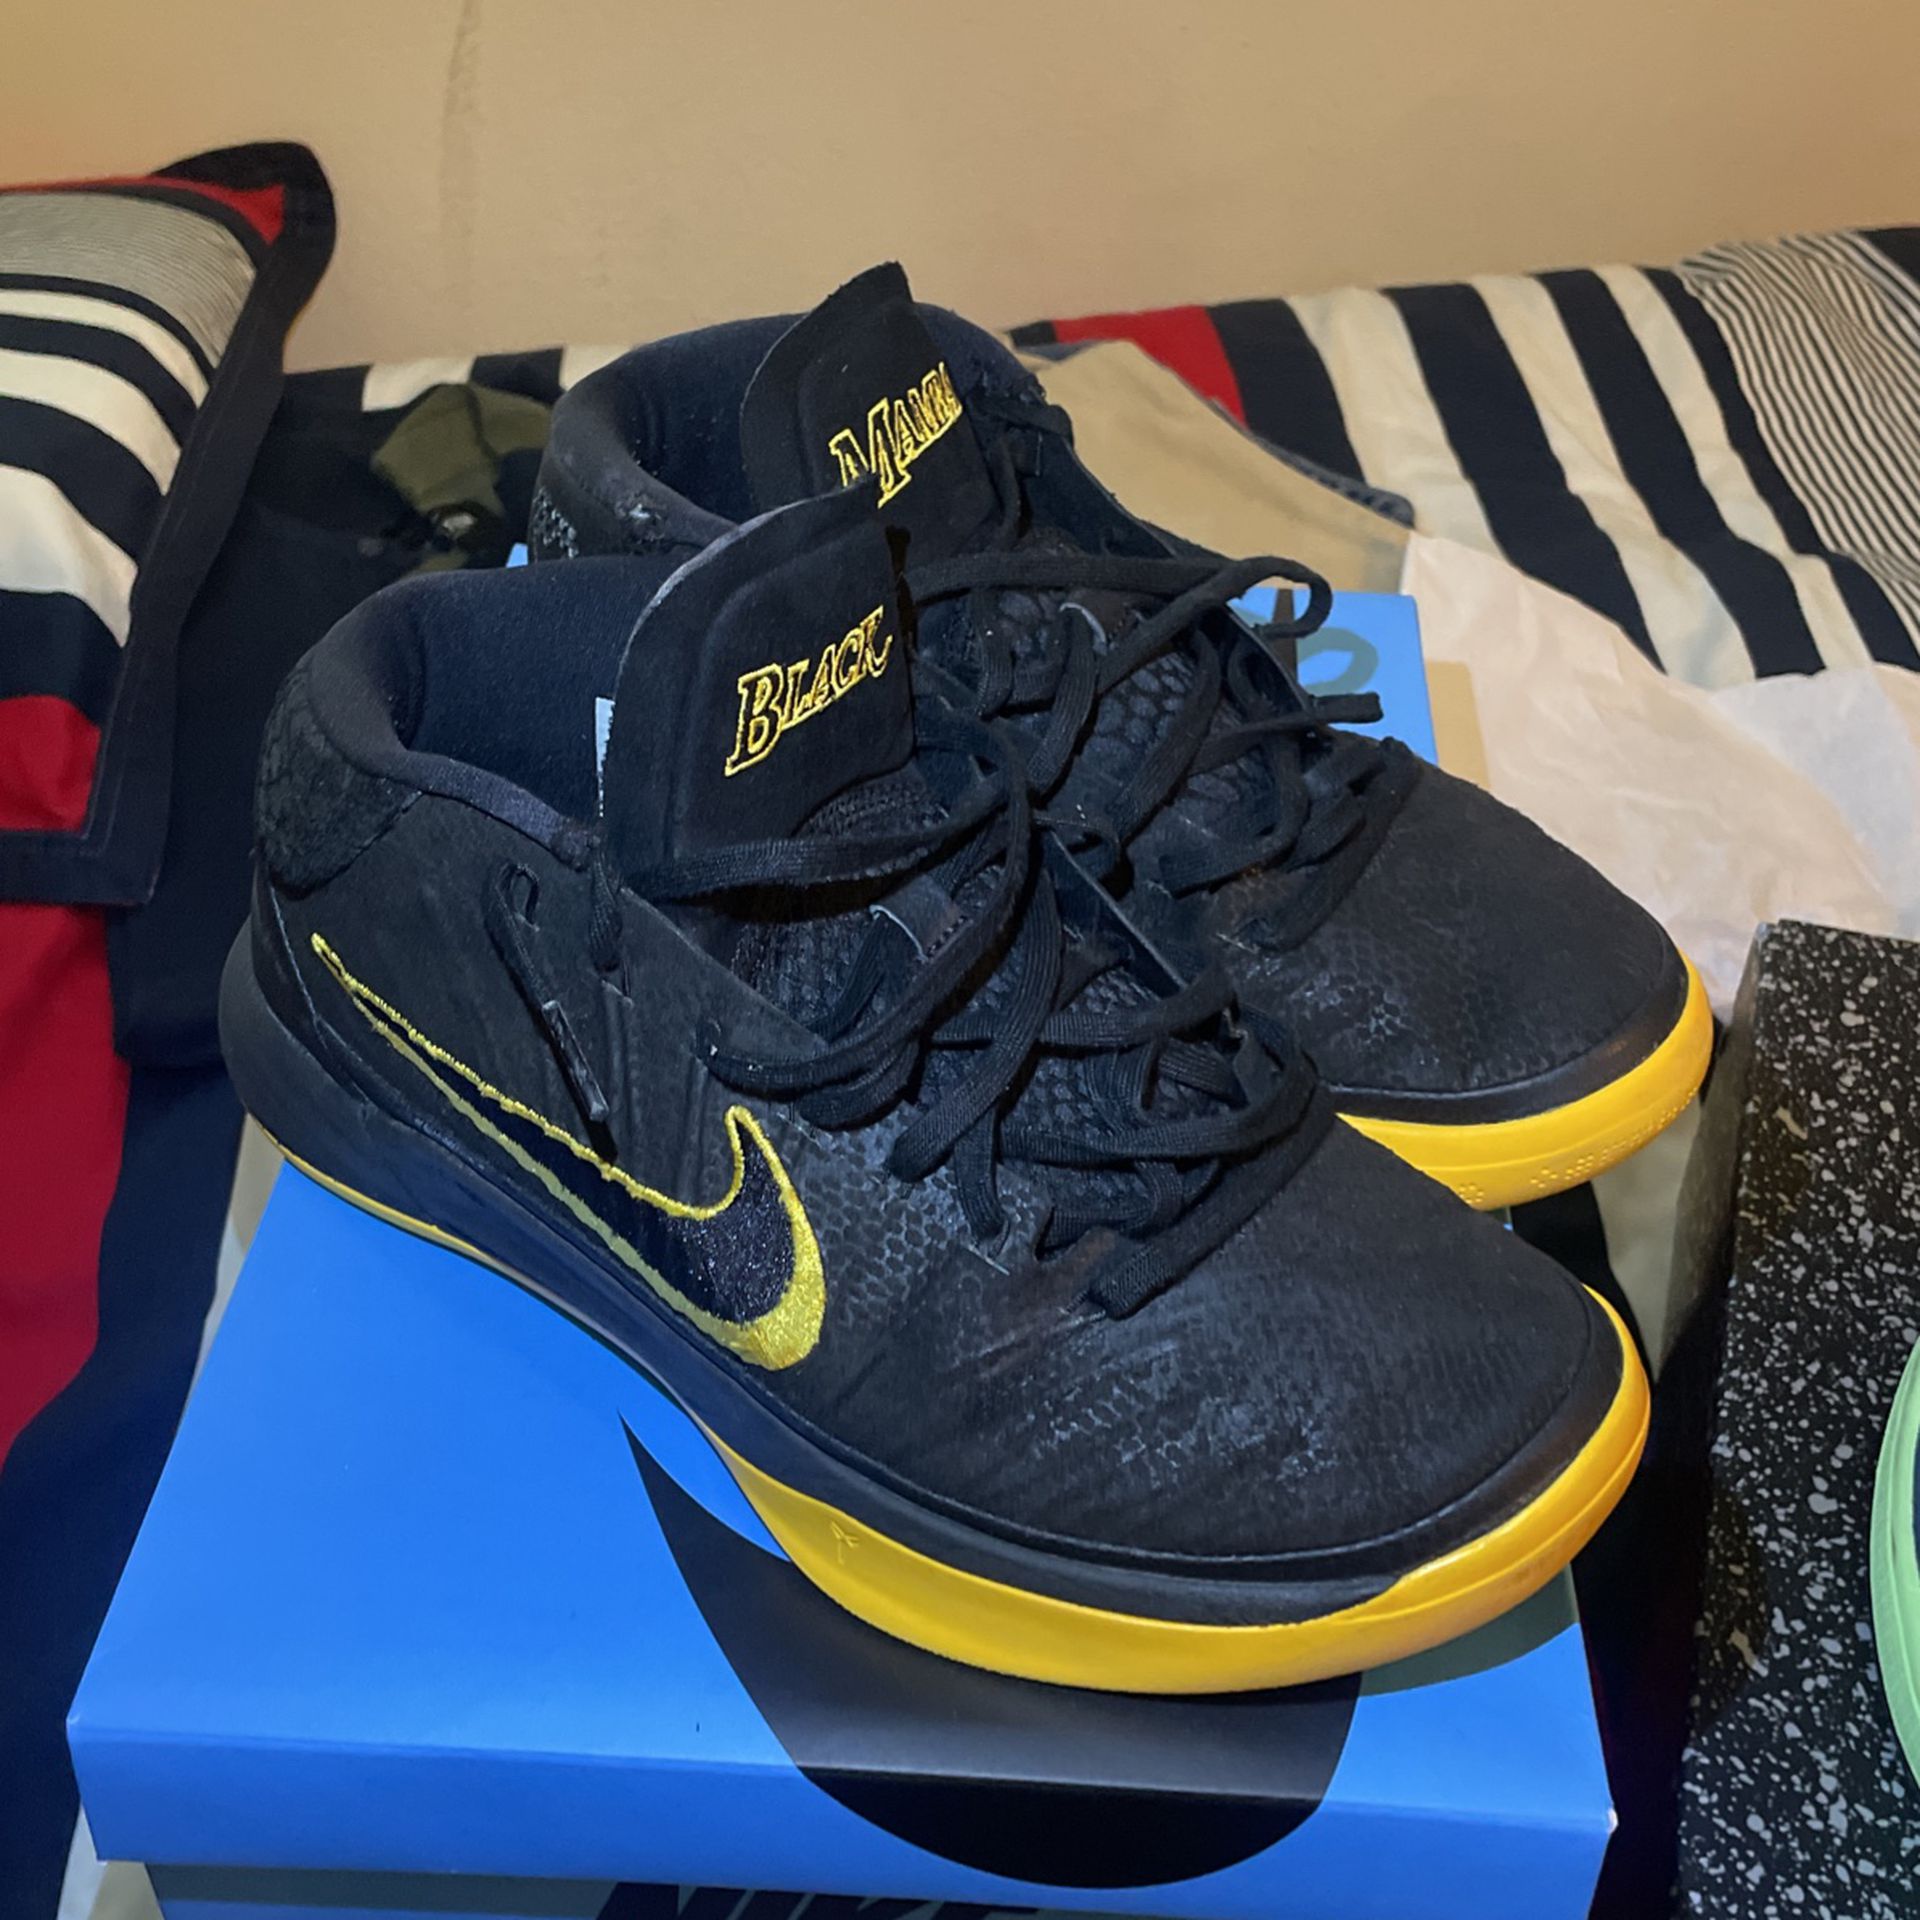 Kobe A.D. “Black Mamba” Edition Sz. 13 for Sale in Lakewood, WA - OfferUp